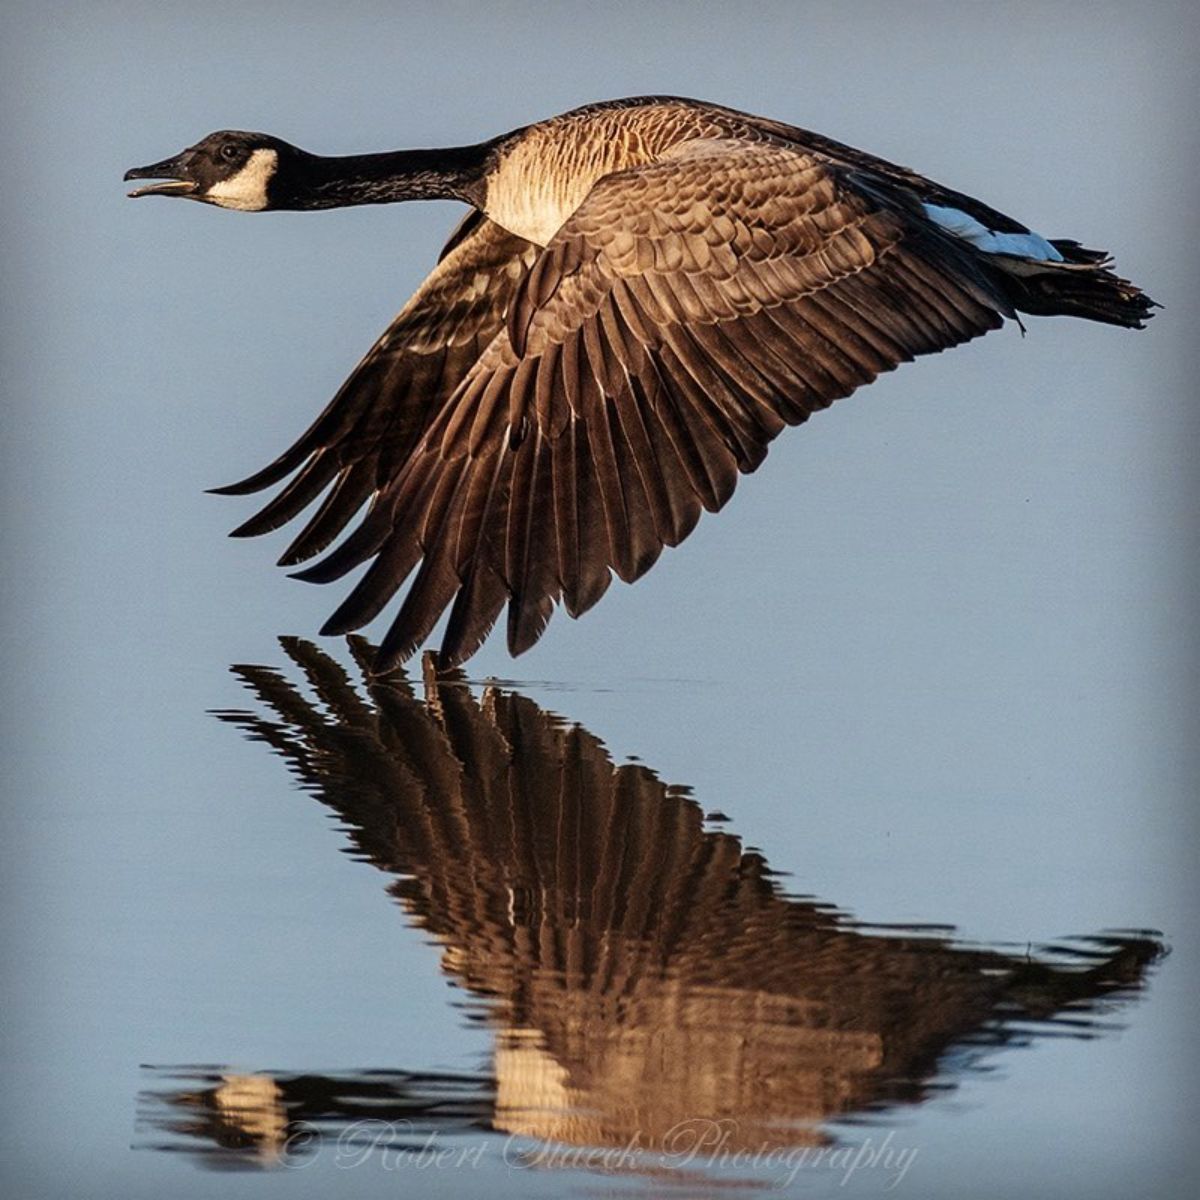 A flying Canadian Goose over the water.